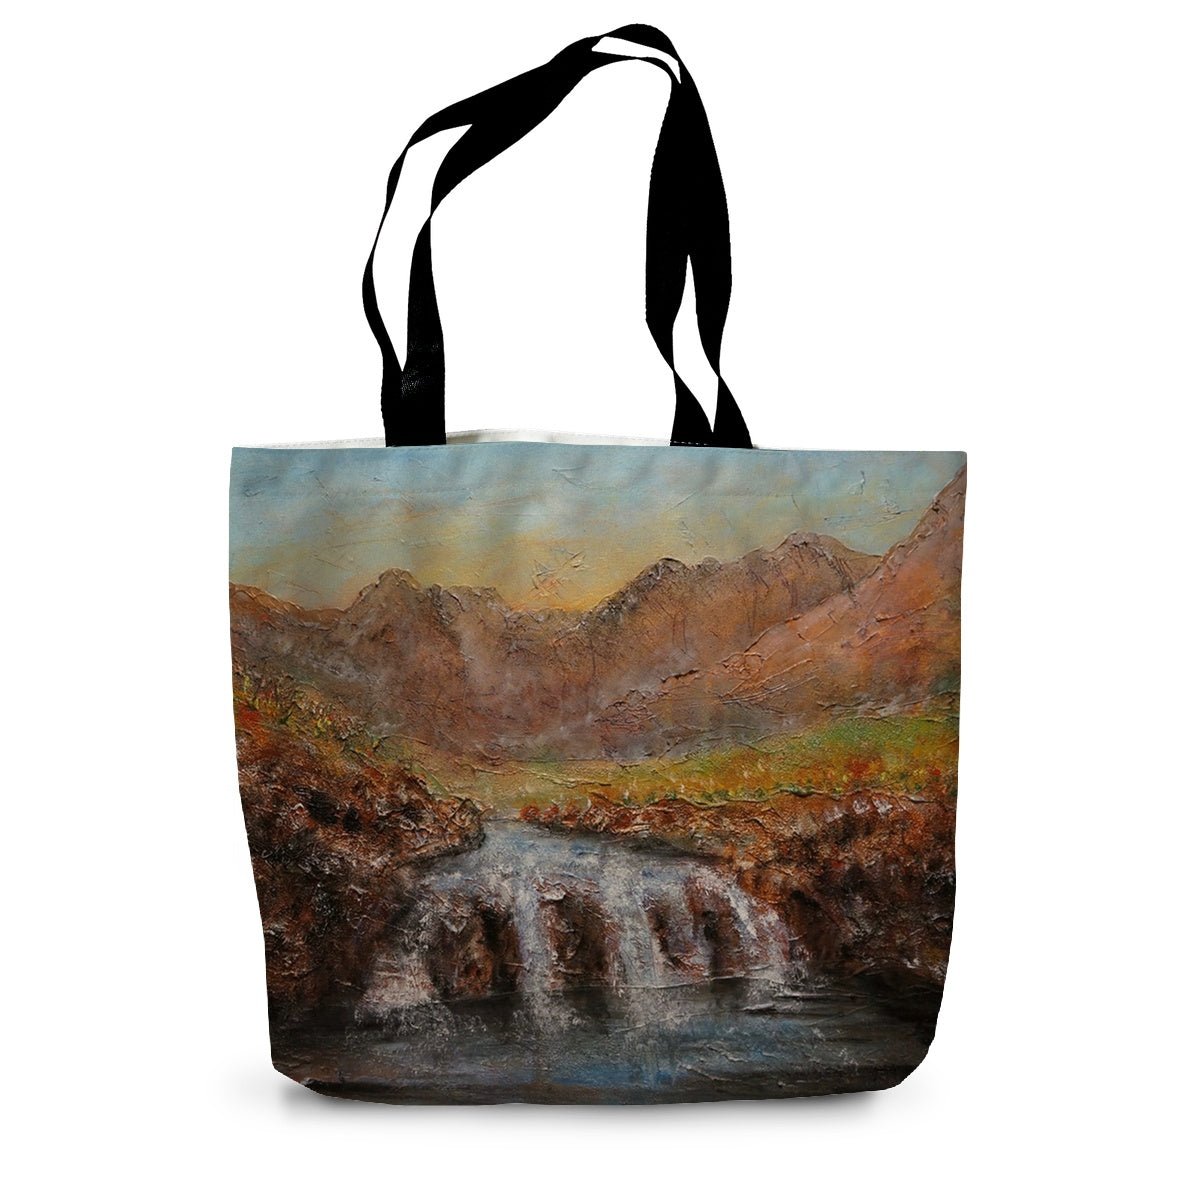 Fairy Pools Dawn Skye Art Gifts Canvas Tote Bag-Bags-Skye Art Gallery-14"x18.5"-Paintings, Prints, Homeware, Art Gifts From Scotland By Scottish Artist Kevin Hunter